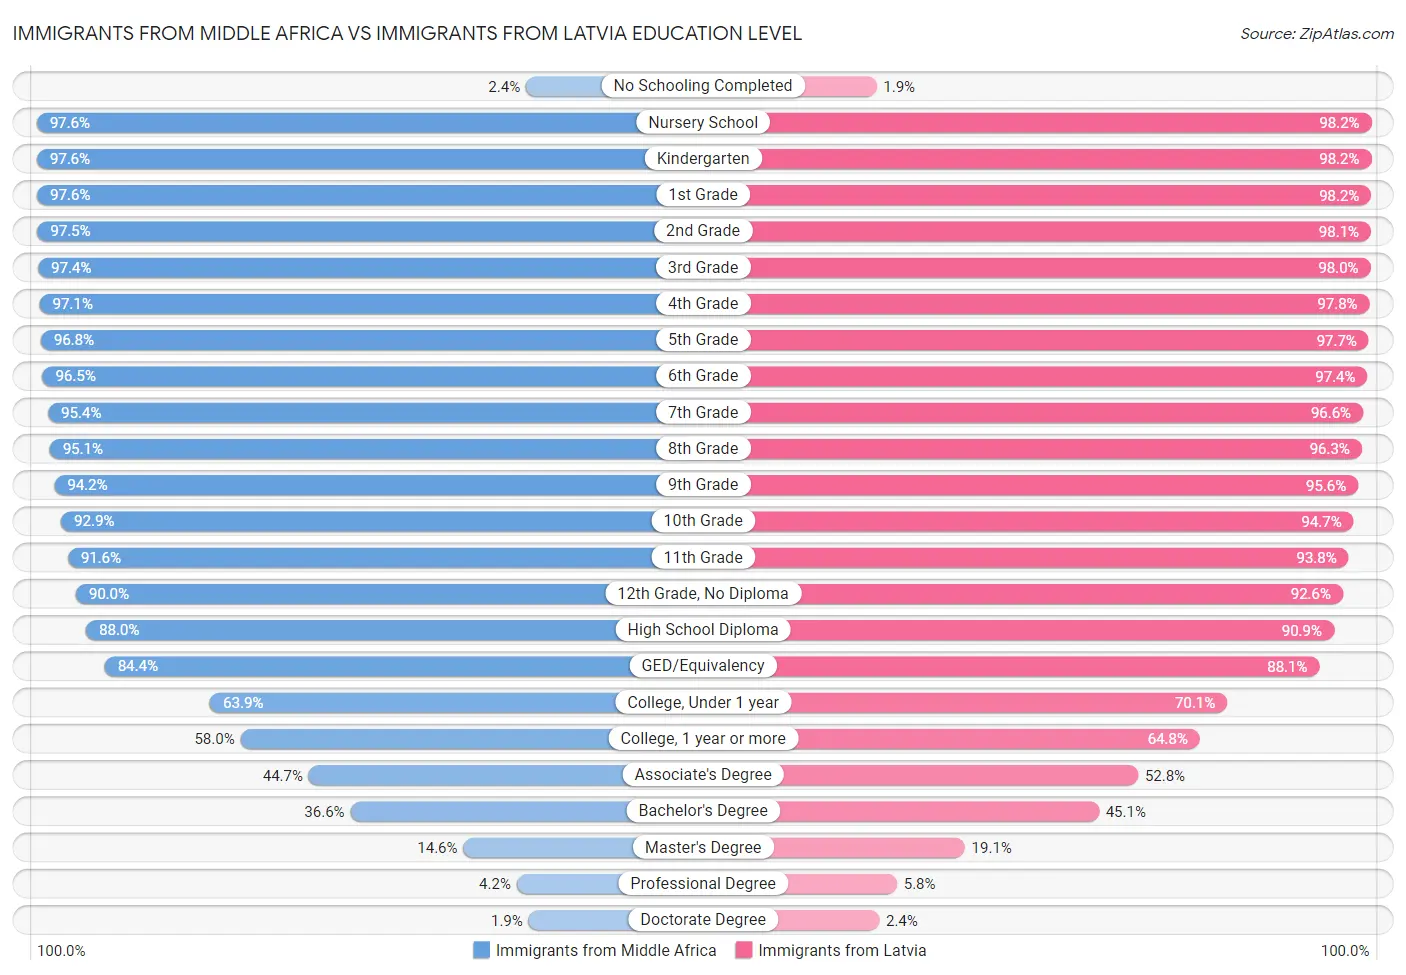 Immigrants from Middle Africa vs Immigrants from Latvia Education Level